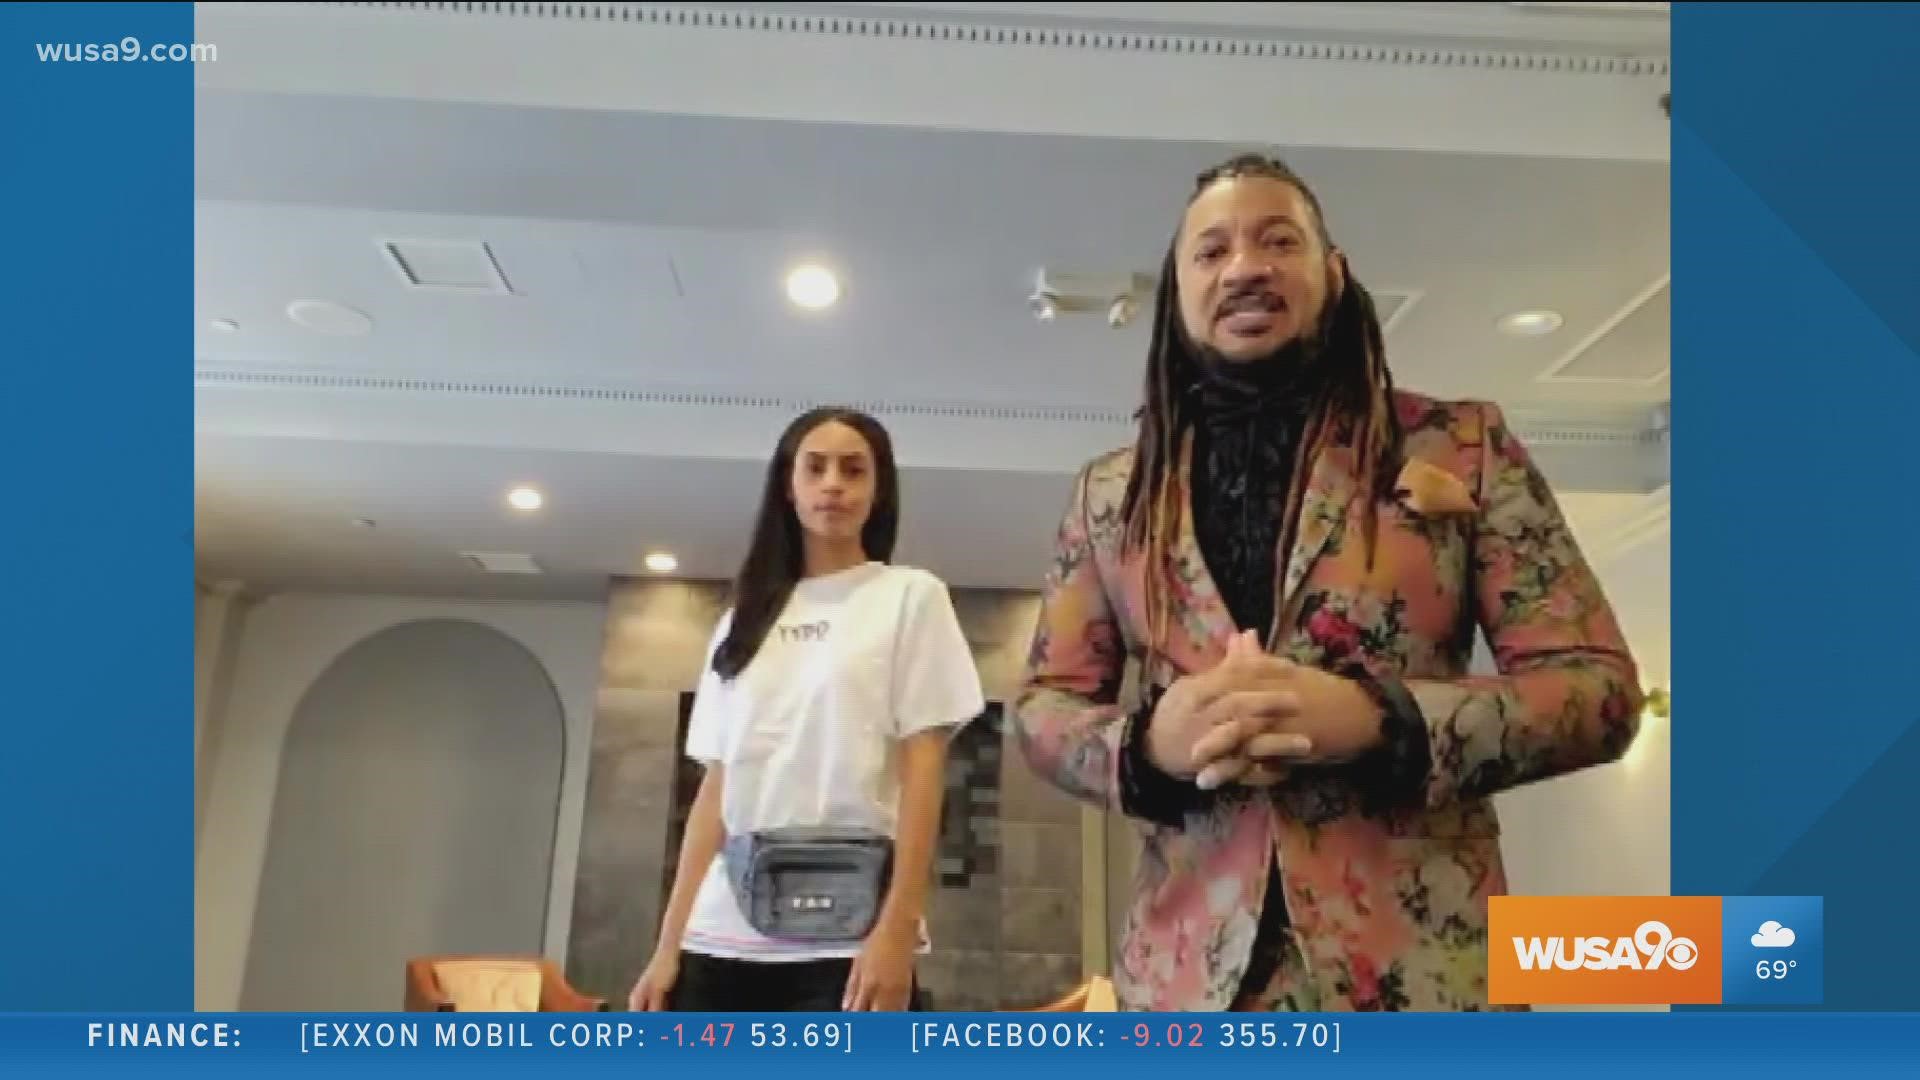 DC Fashion Week founder Ean Williams explains how they are trying to help the region become an international player in the fashion industry.